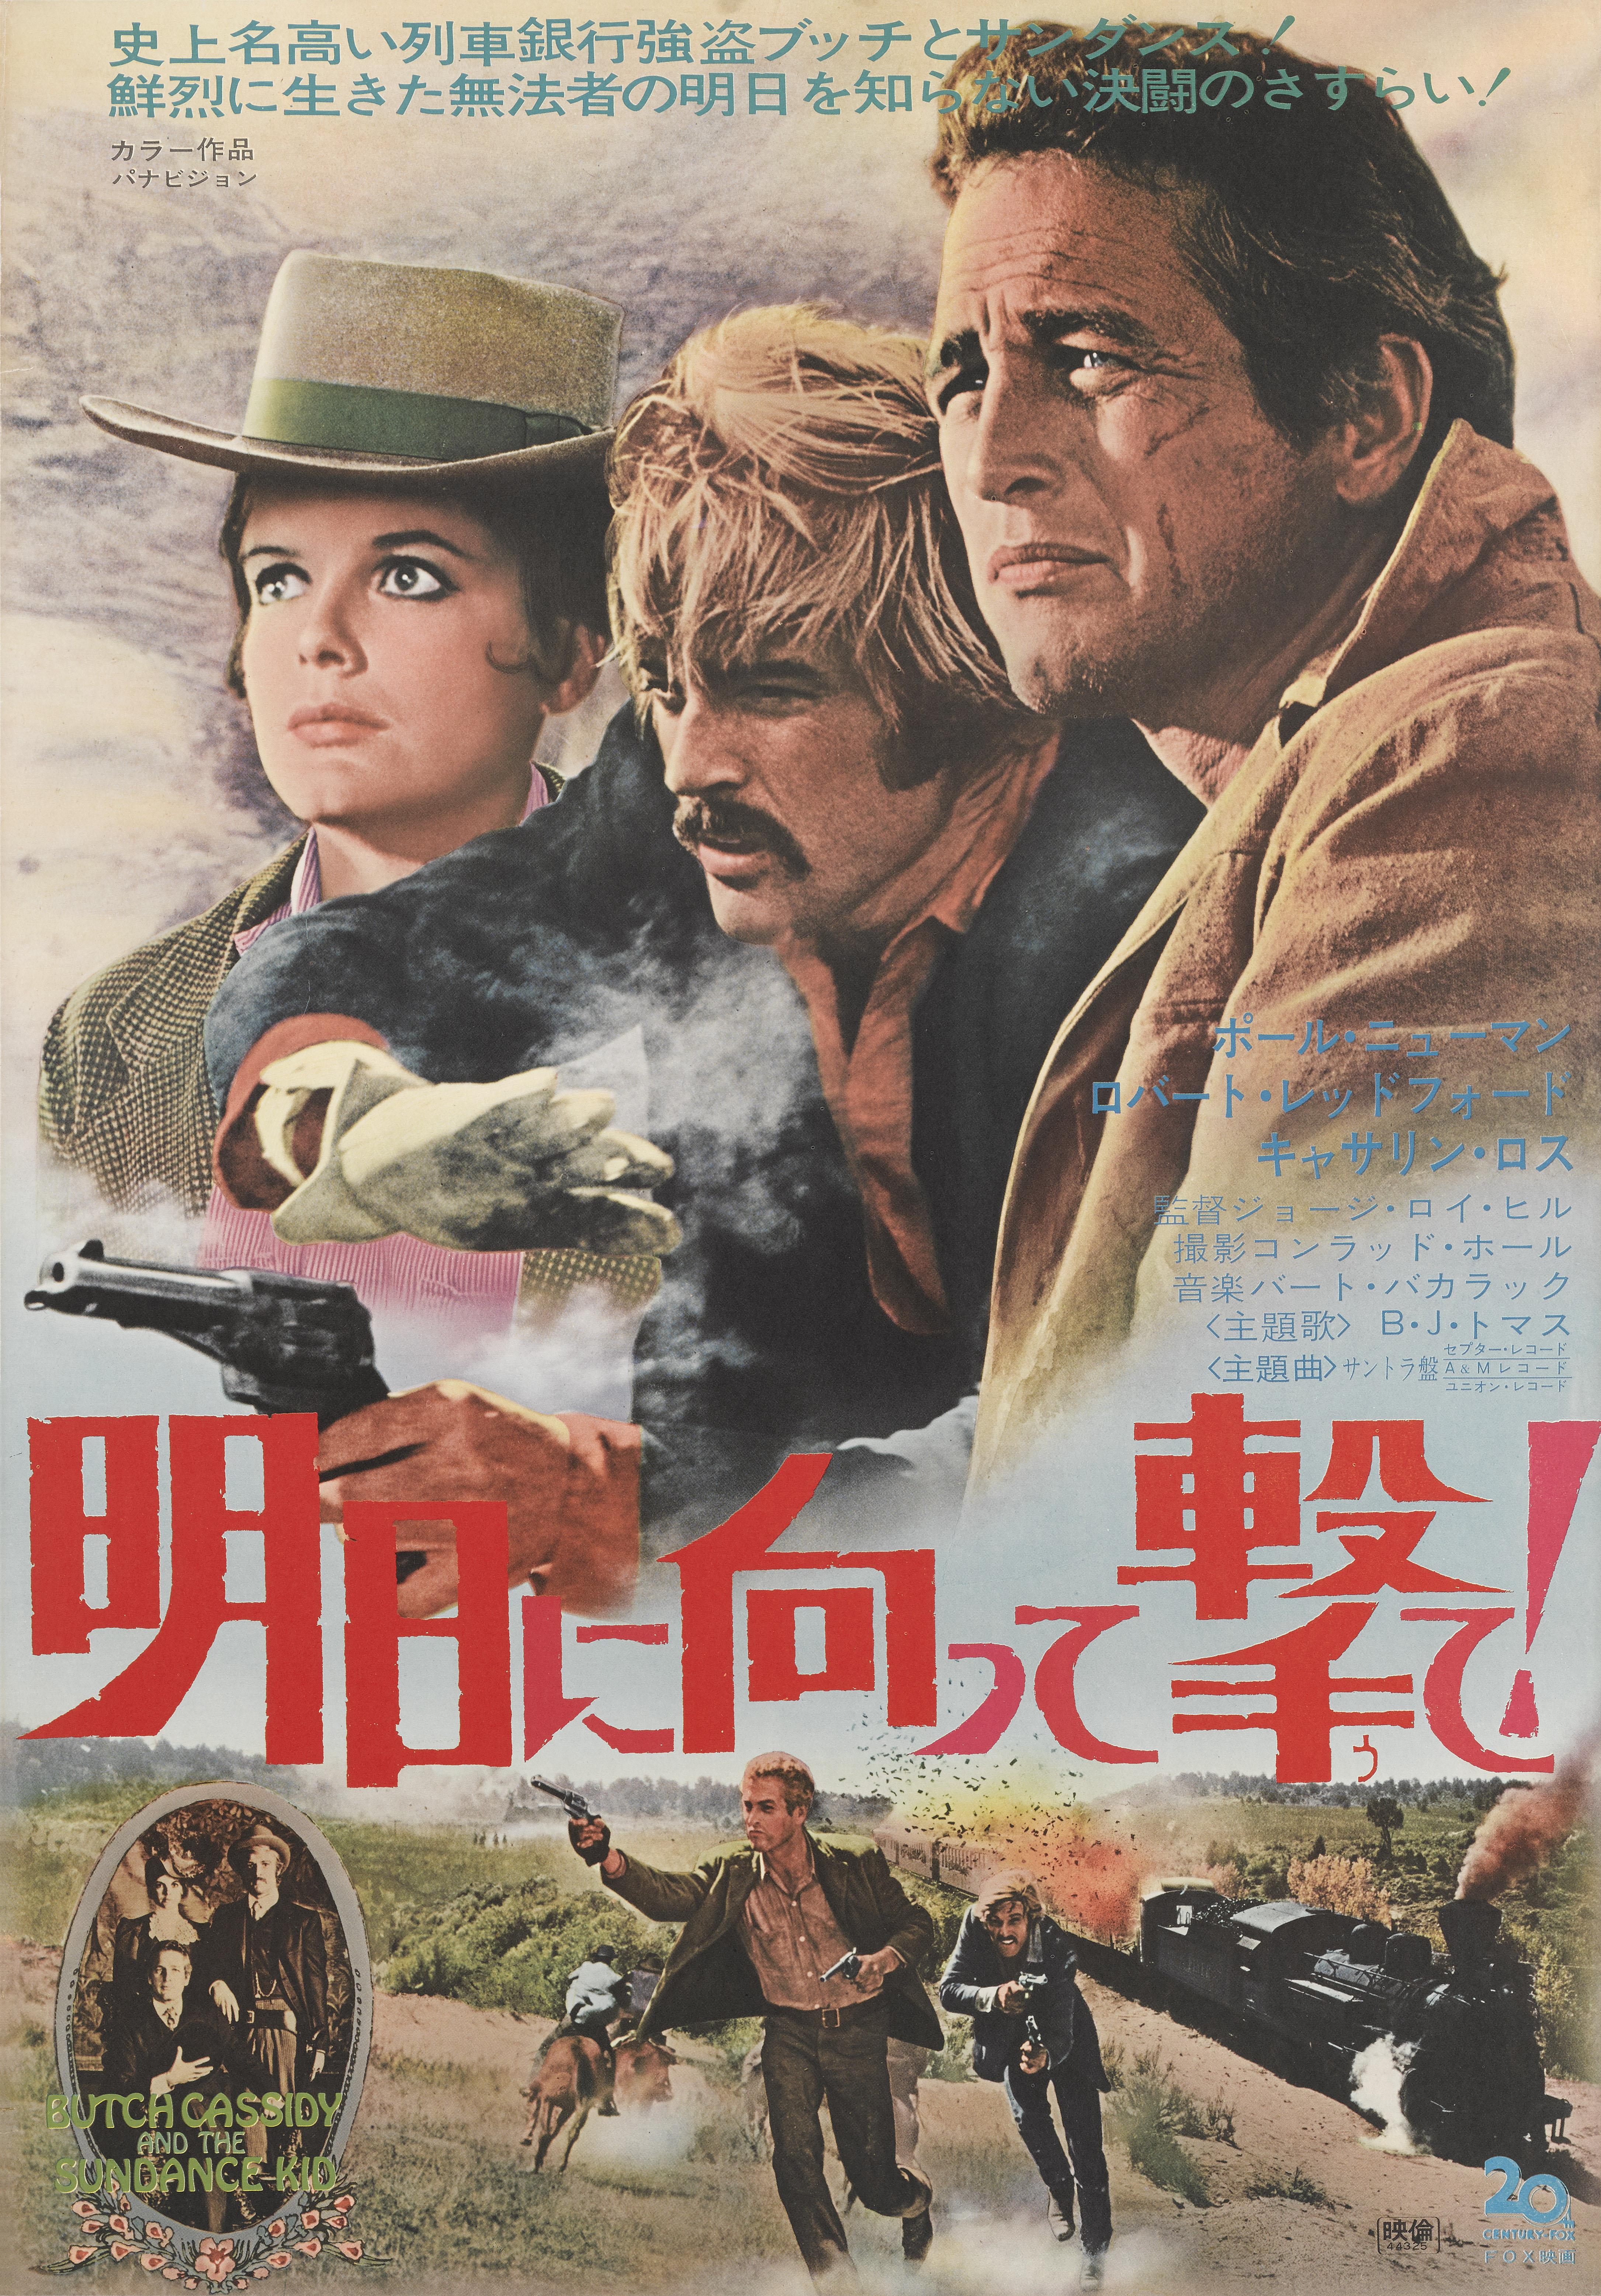 butch cassidy and the sundance kid images